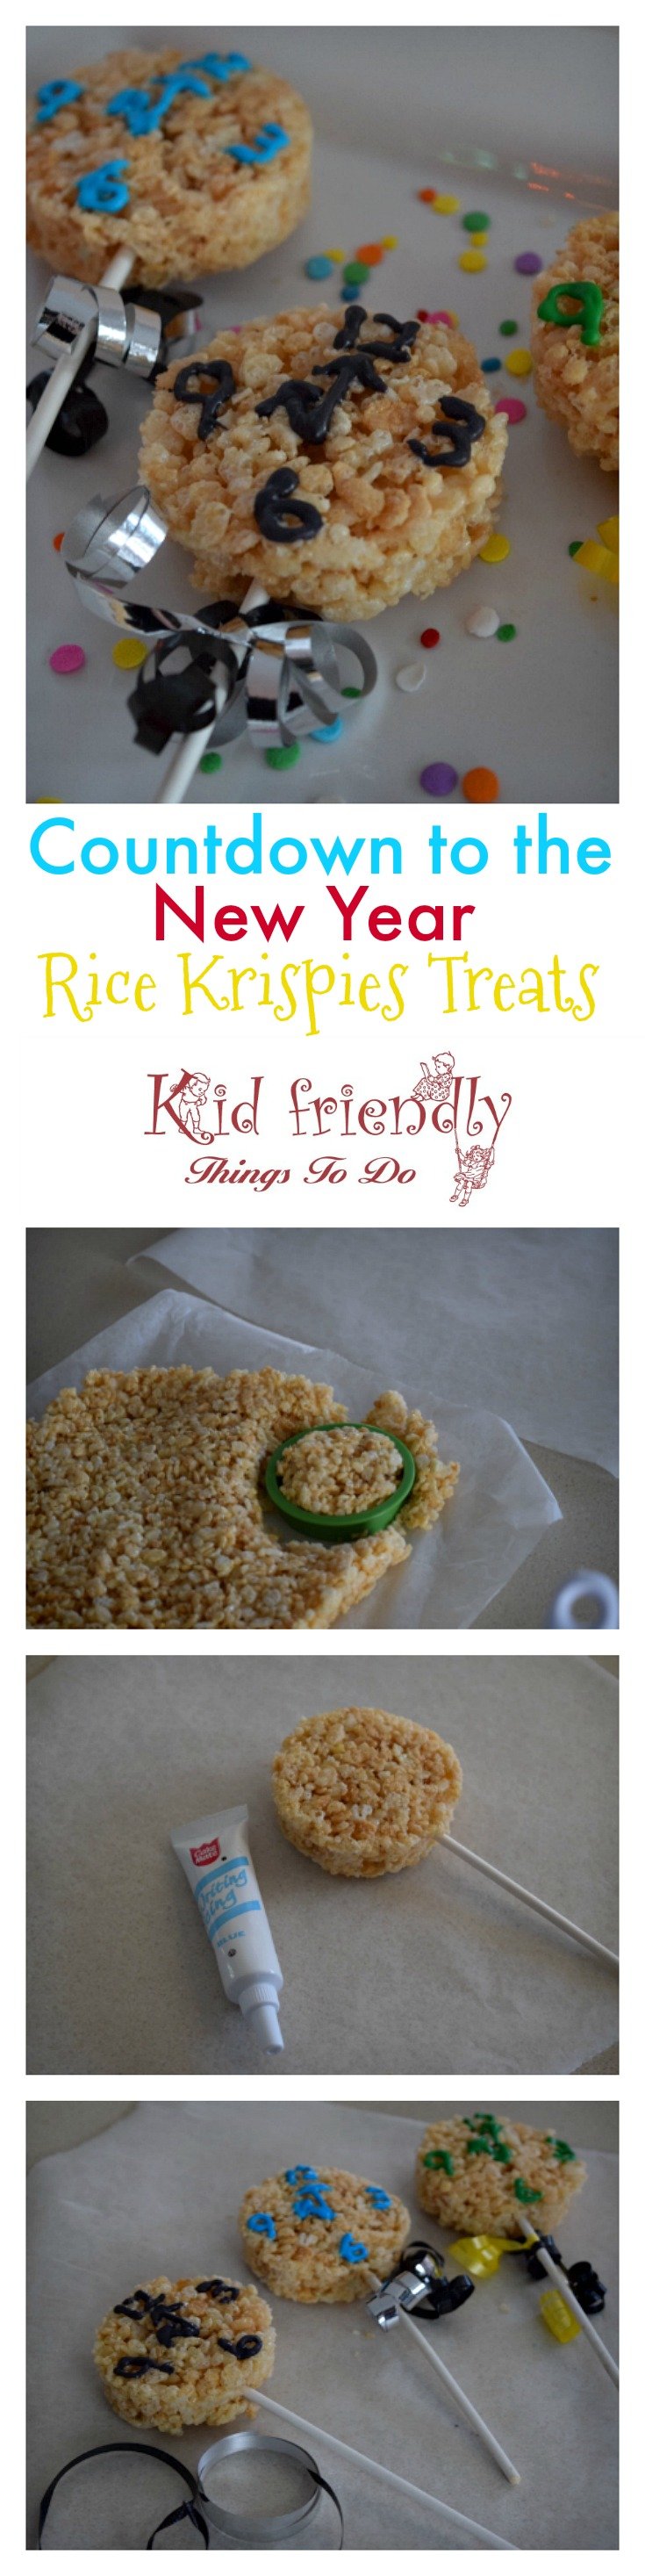 Fun Countdown to the New Year Rice Krispies Treats for a fun New Year's Eve food for the kids and you to enjoy! www.kidfriendlythingstodo.com